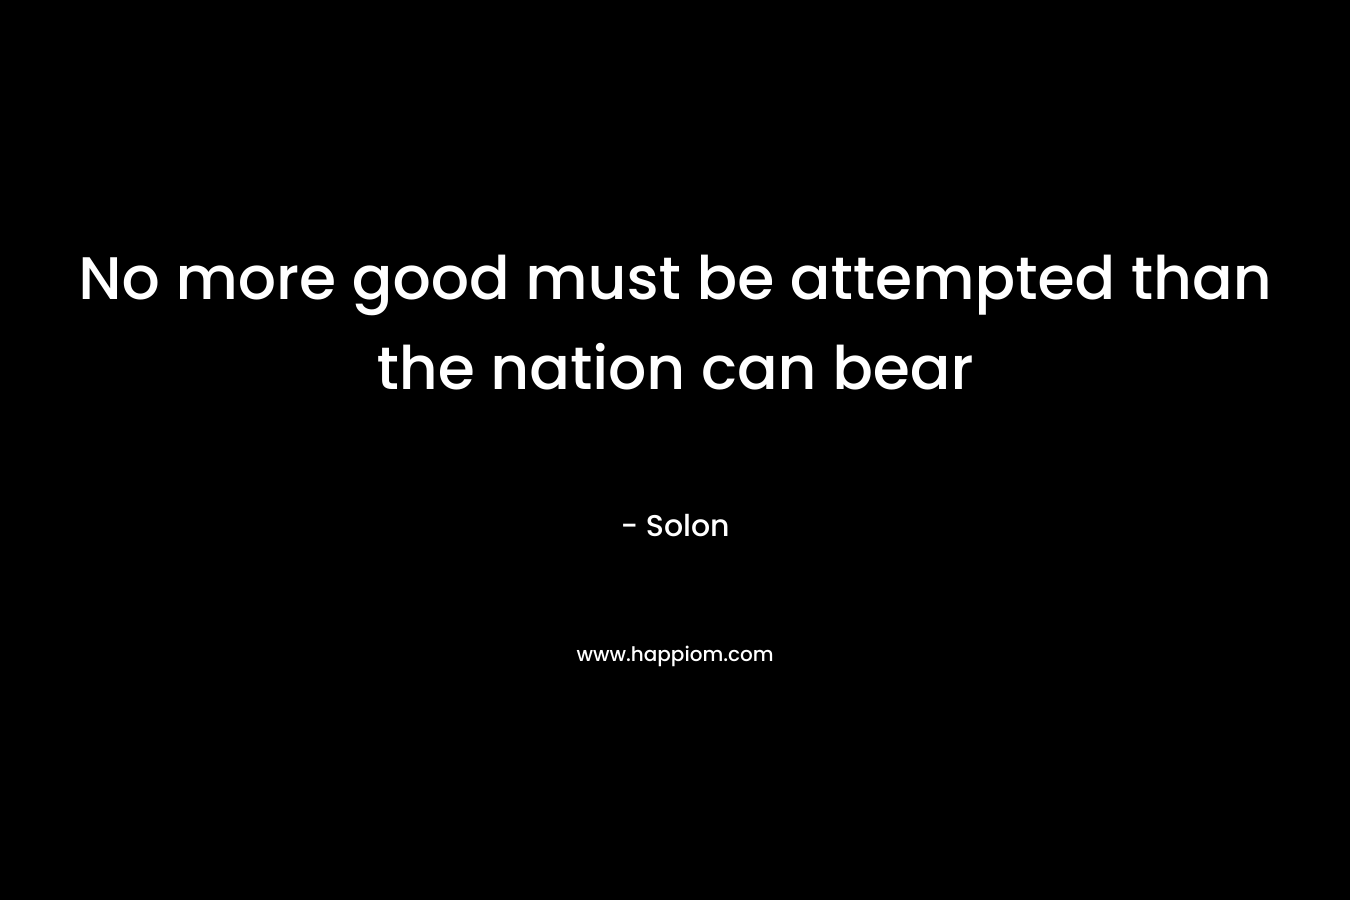 No more good must be attempted than the nation can bear